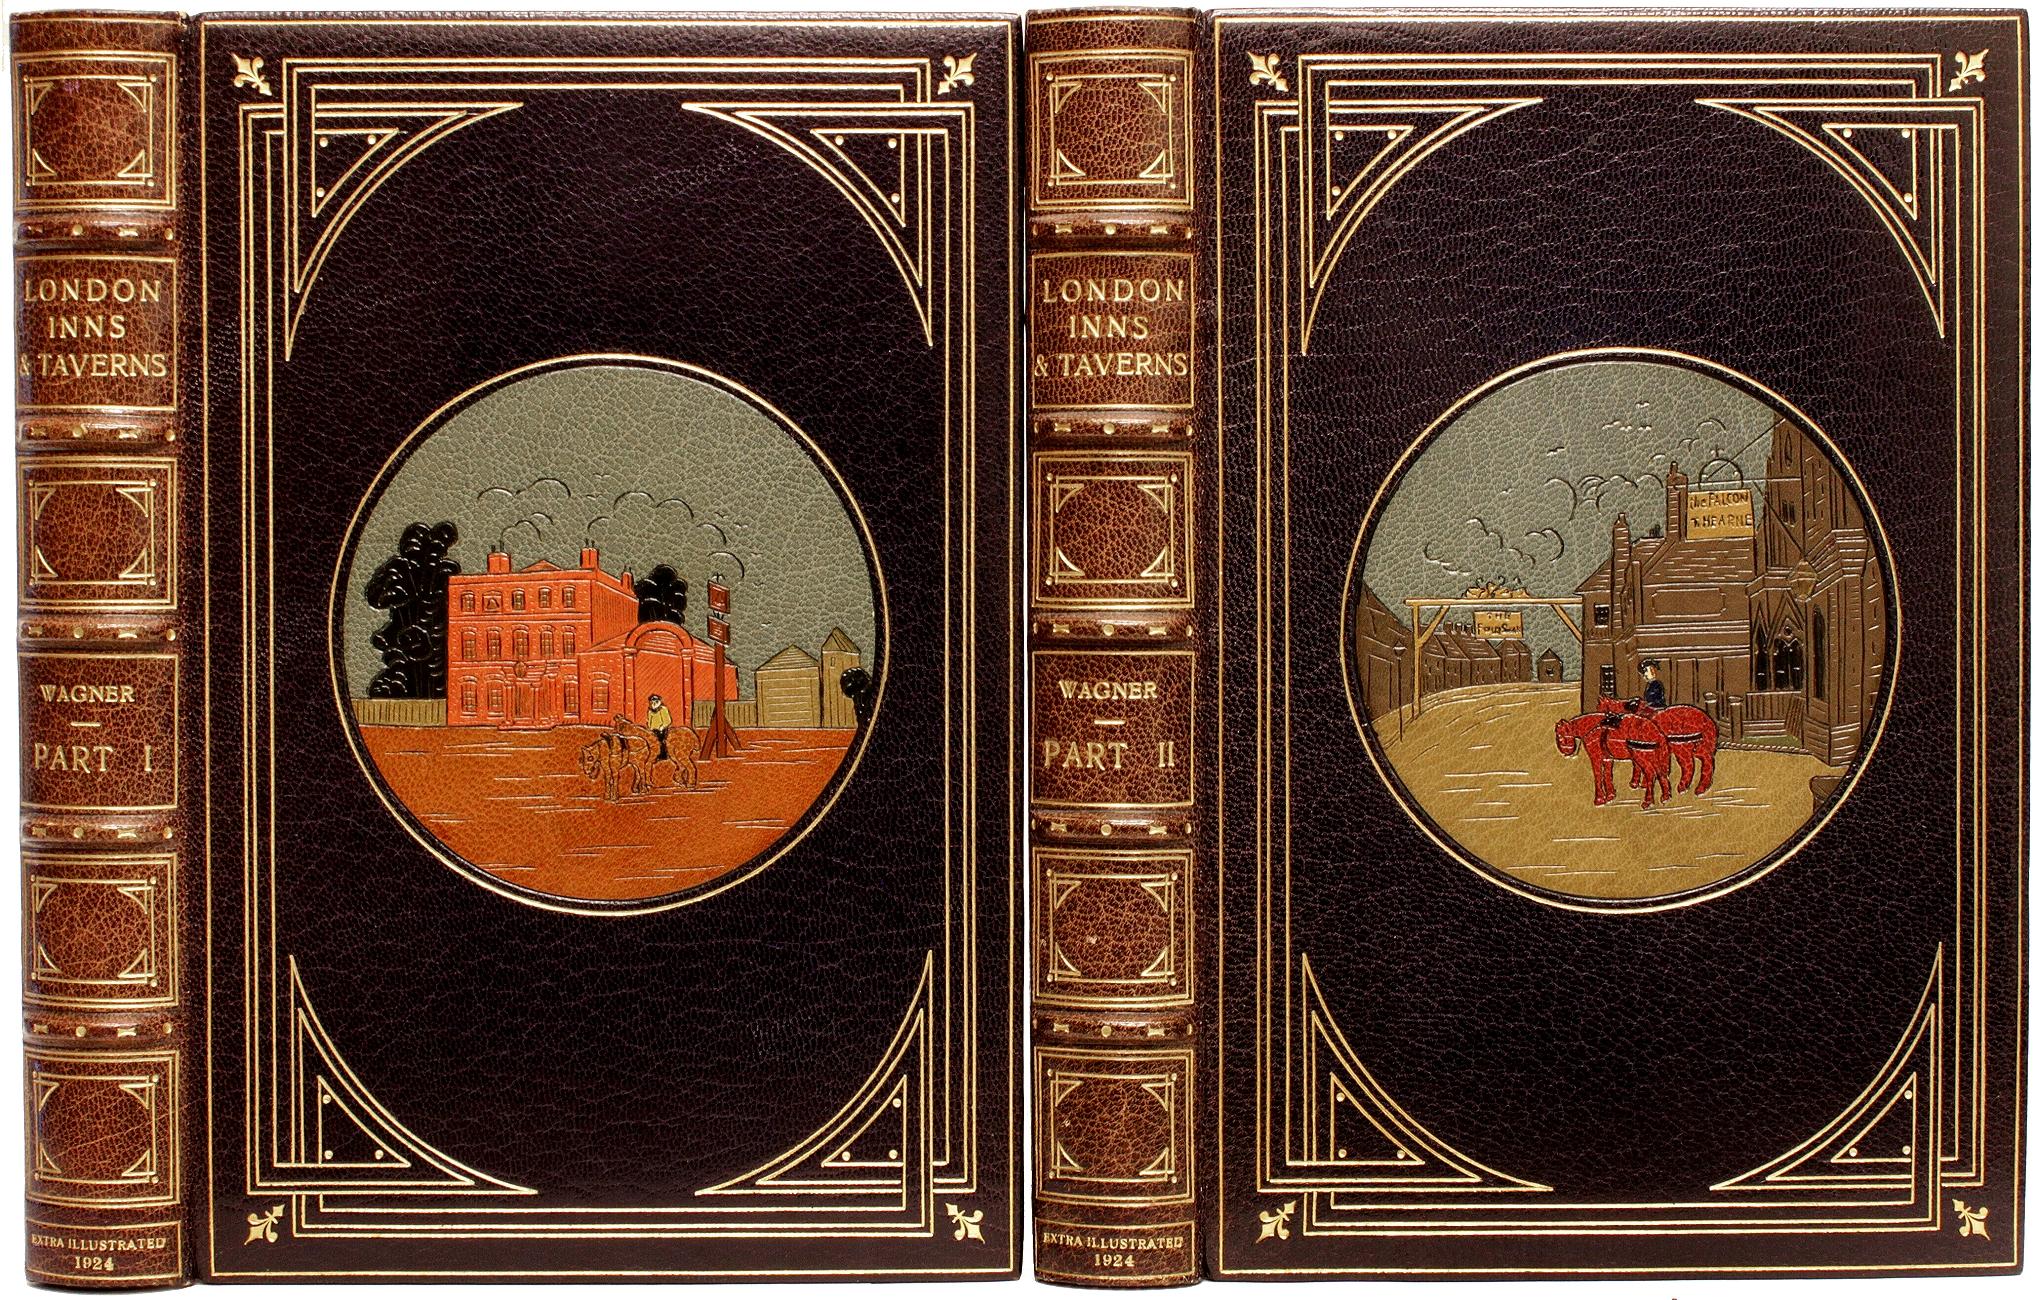 Author: Wagner, Leopold.
Title: London Inns and Taverns.
Publisher: London: George Allen & Unwin Ltd, 1924.
Description: First Edition Extra Illustrated. 2 vols., 8-11/16